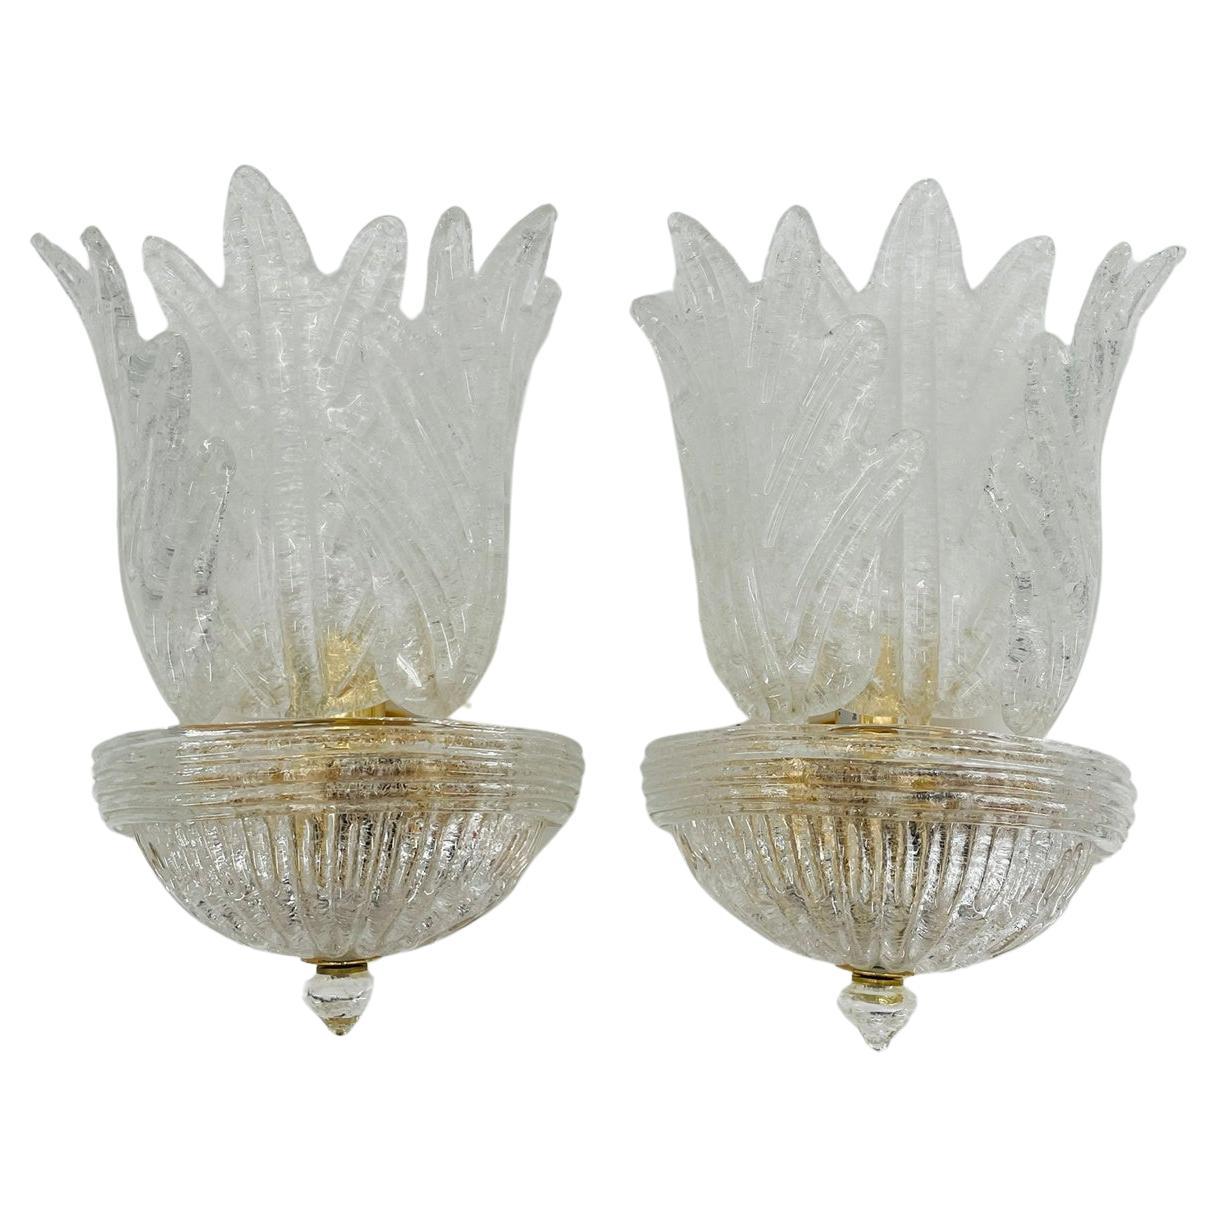 Pair of Murano Glass & Brass Sconces by Italamp S.R.L. Italy 2006